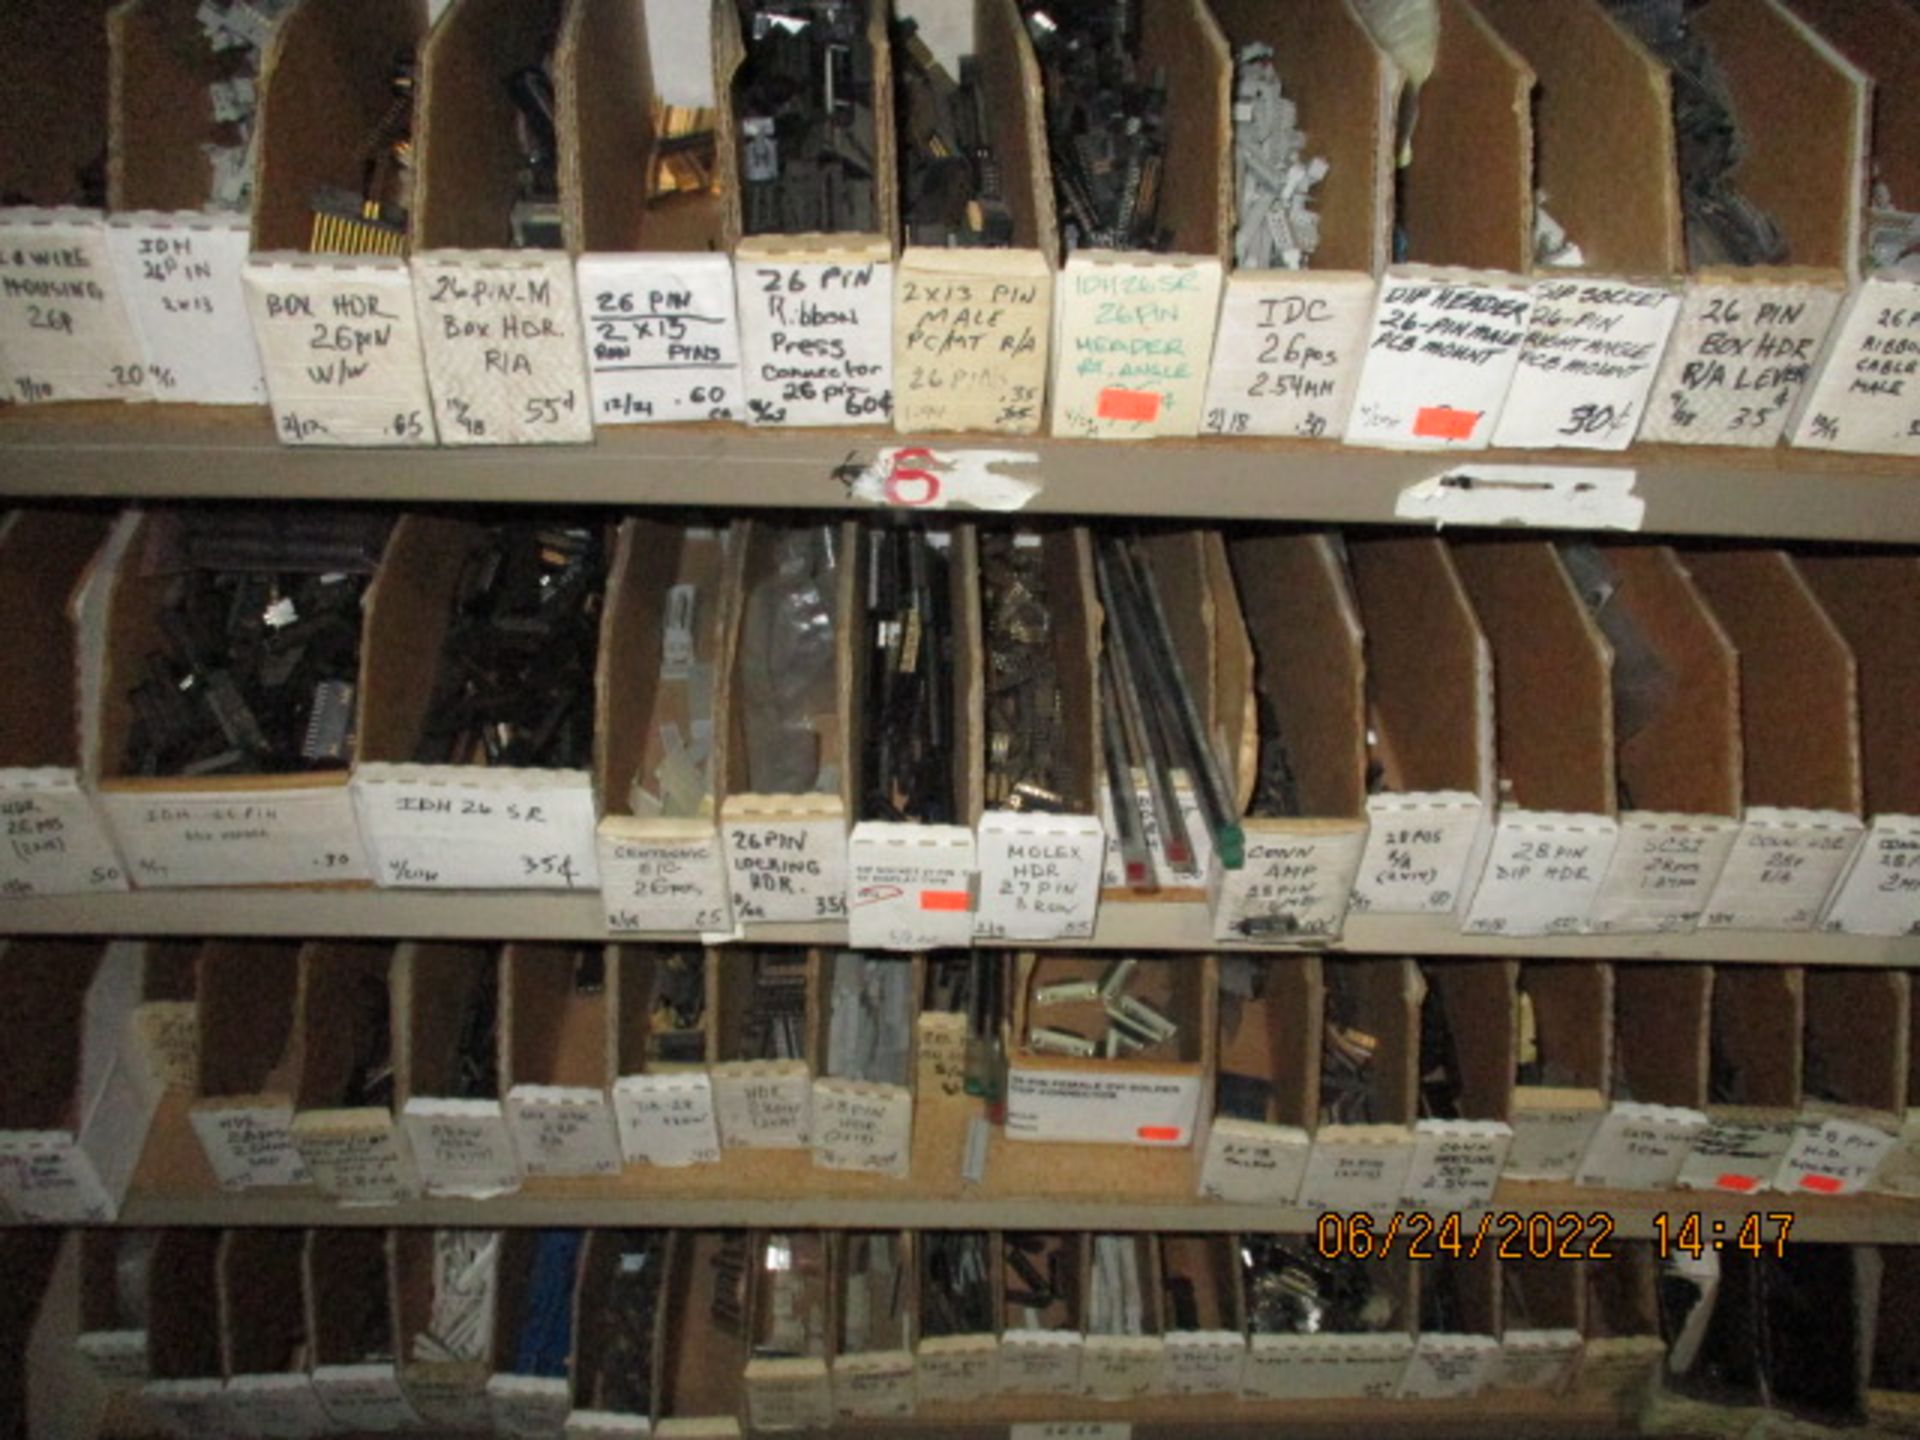 CONTENTS OF SHELVING UNIT CONSISTING OF 25, 26, 27, 28, & 30 PIN CONNECTORS - Image 5 of 6